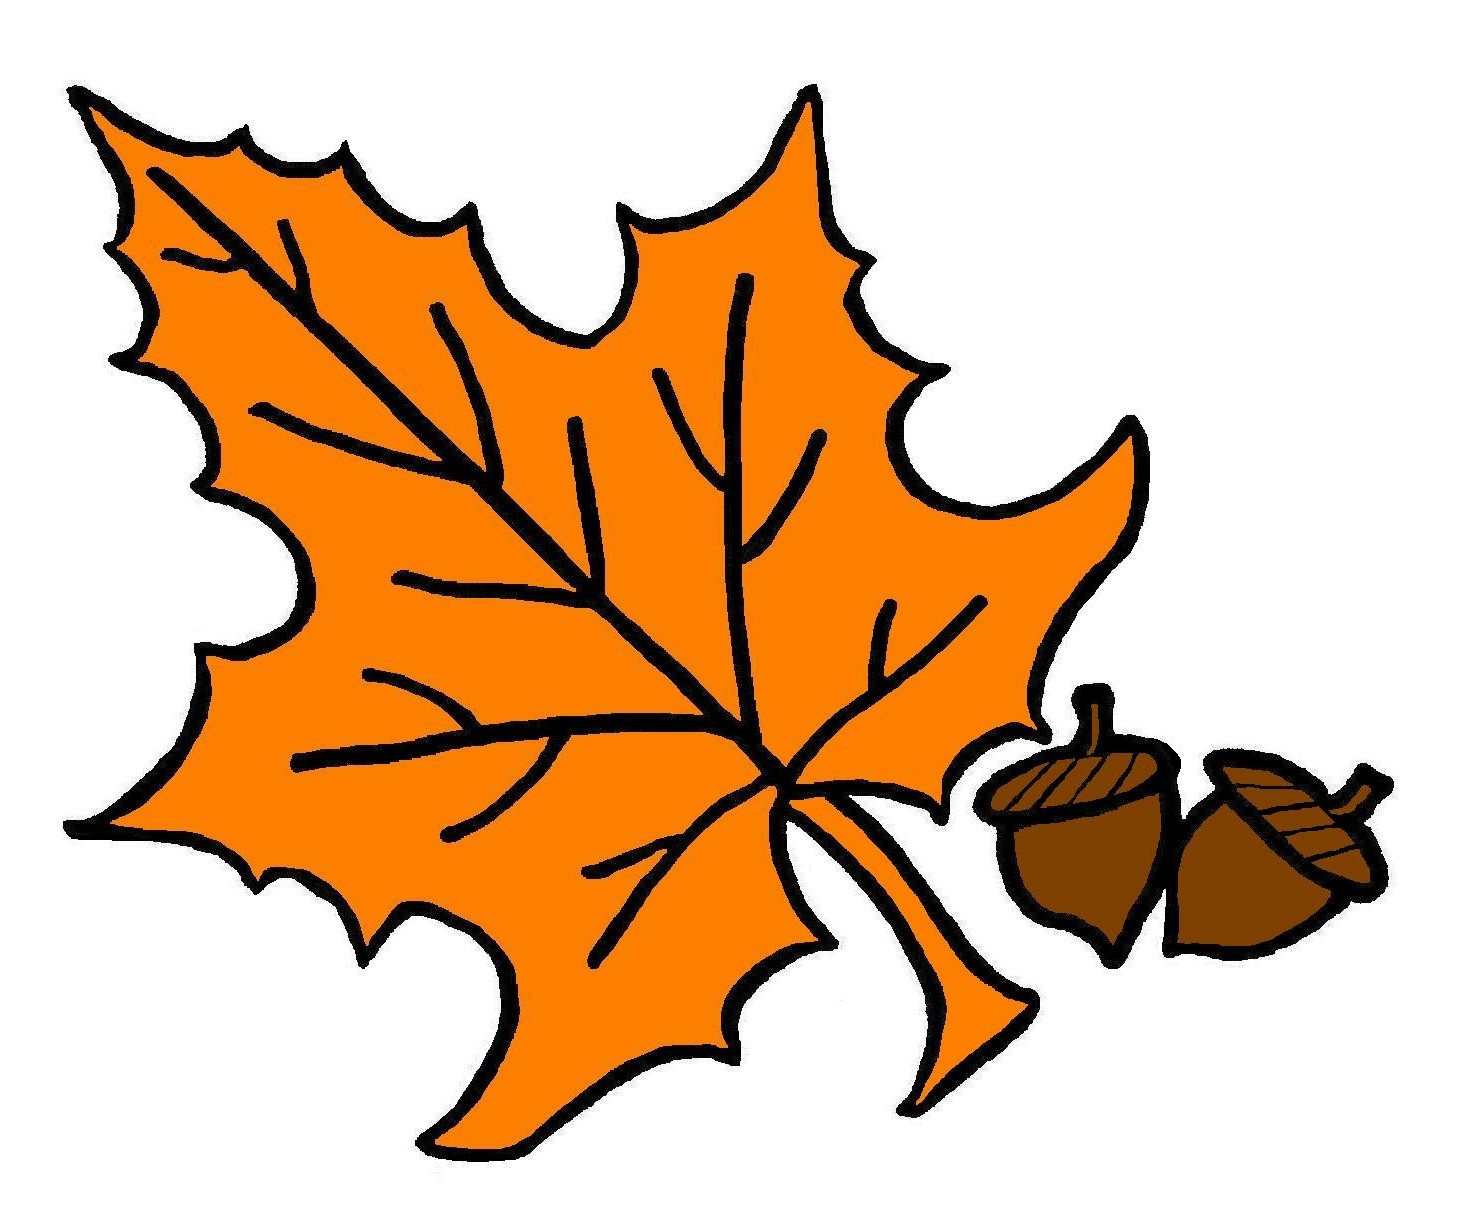 Maple leaves clip art free cl